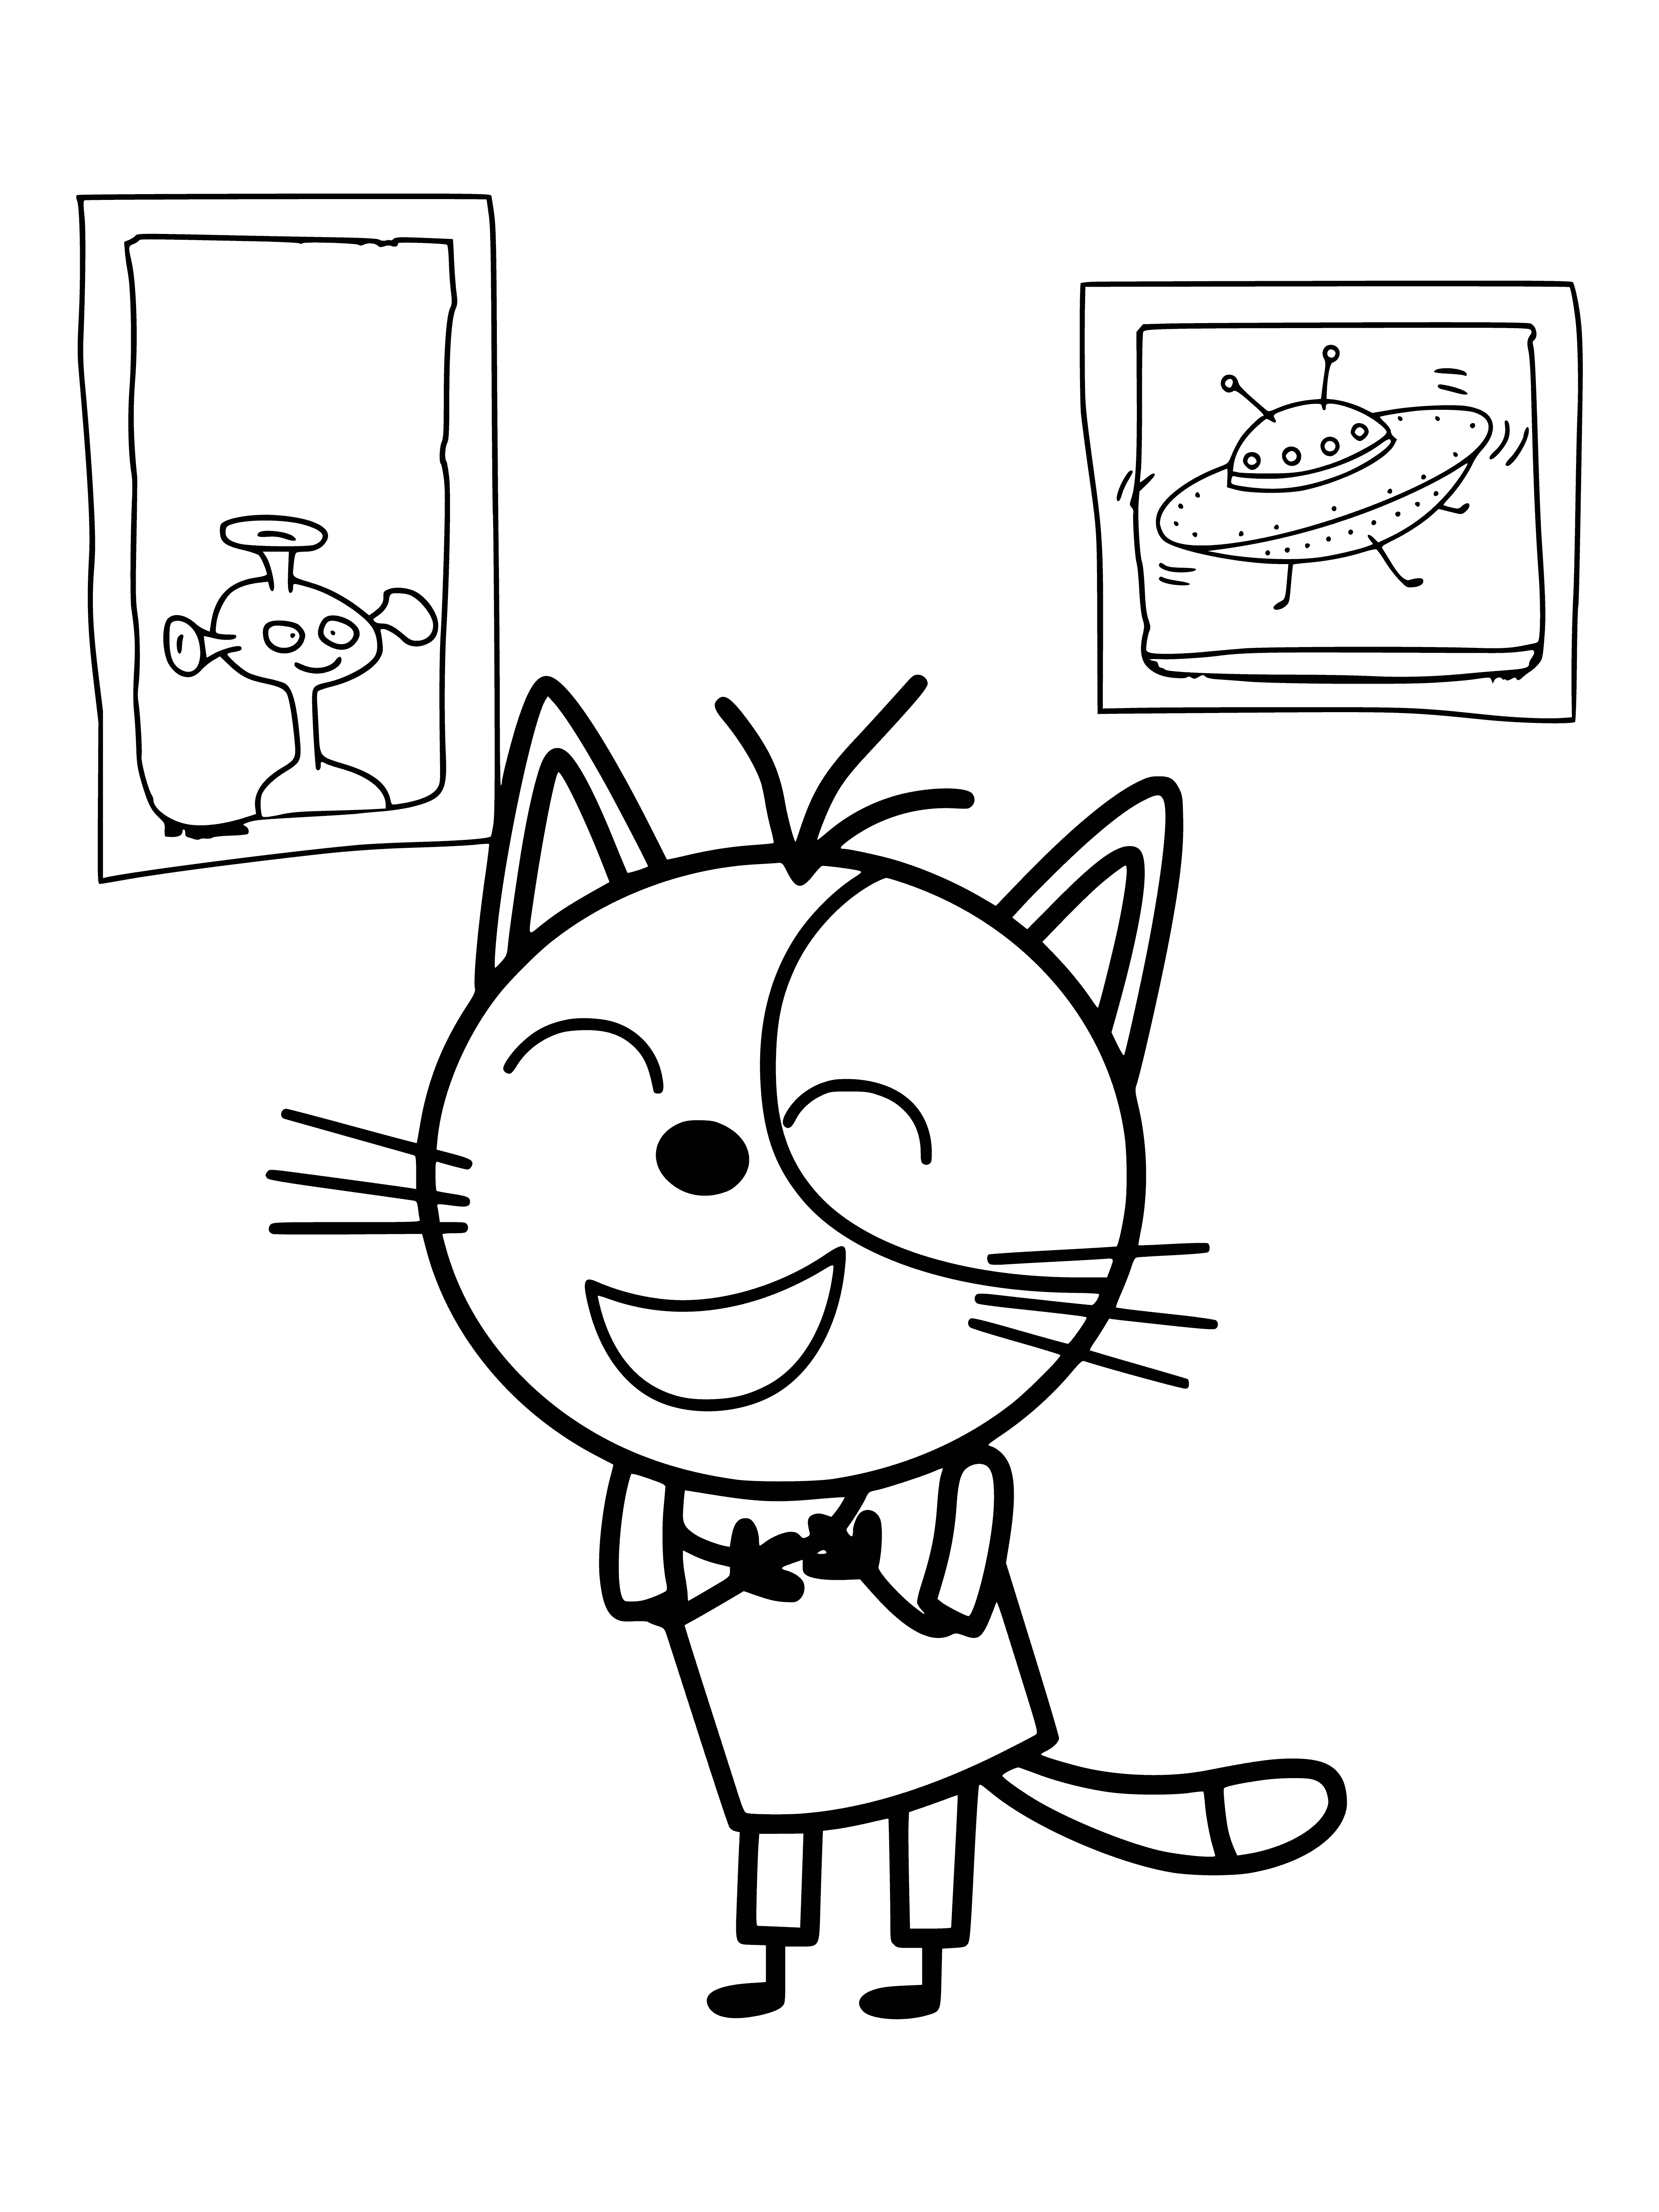 coloring page: 3 cats in coloring page; middle chases left, right watches.